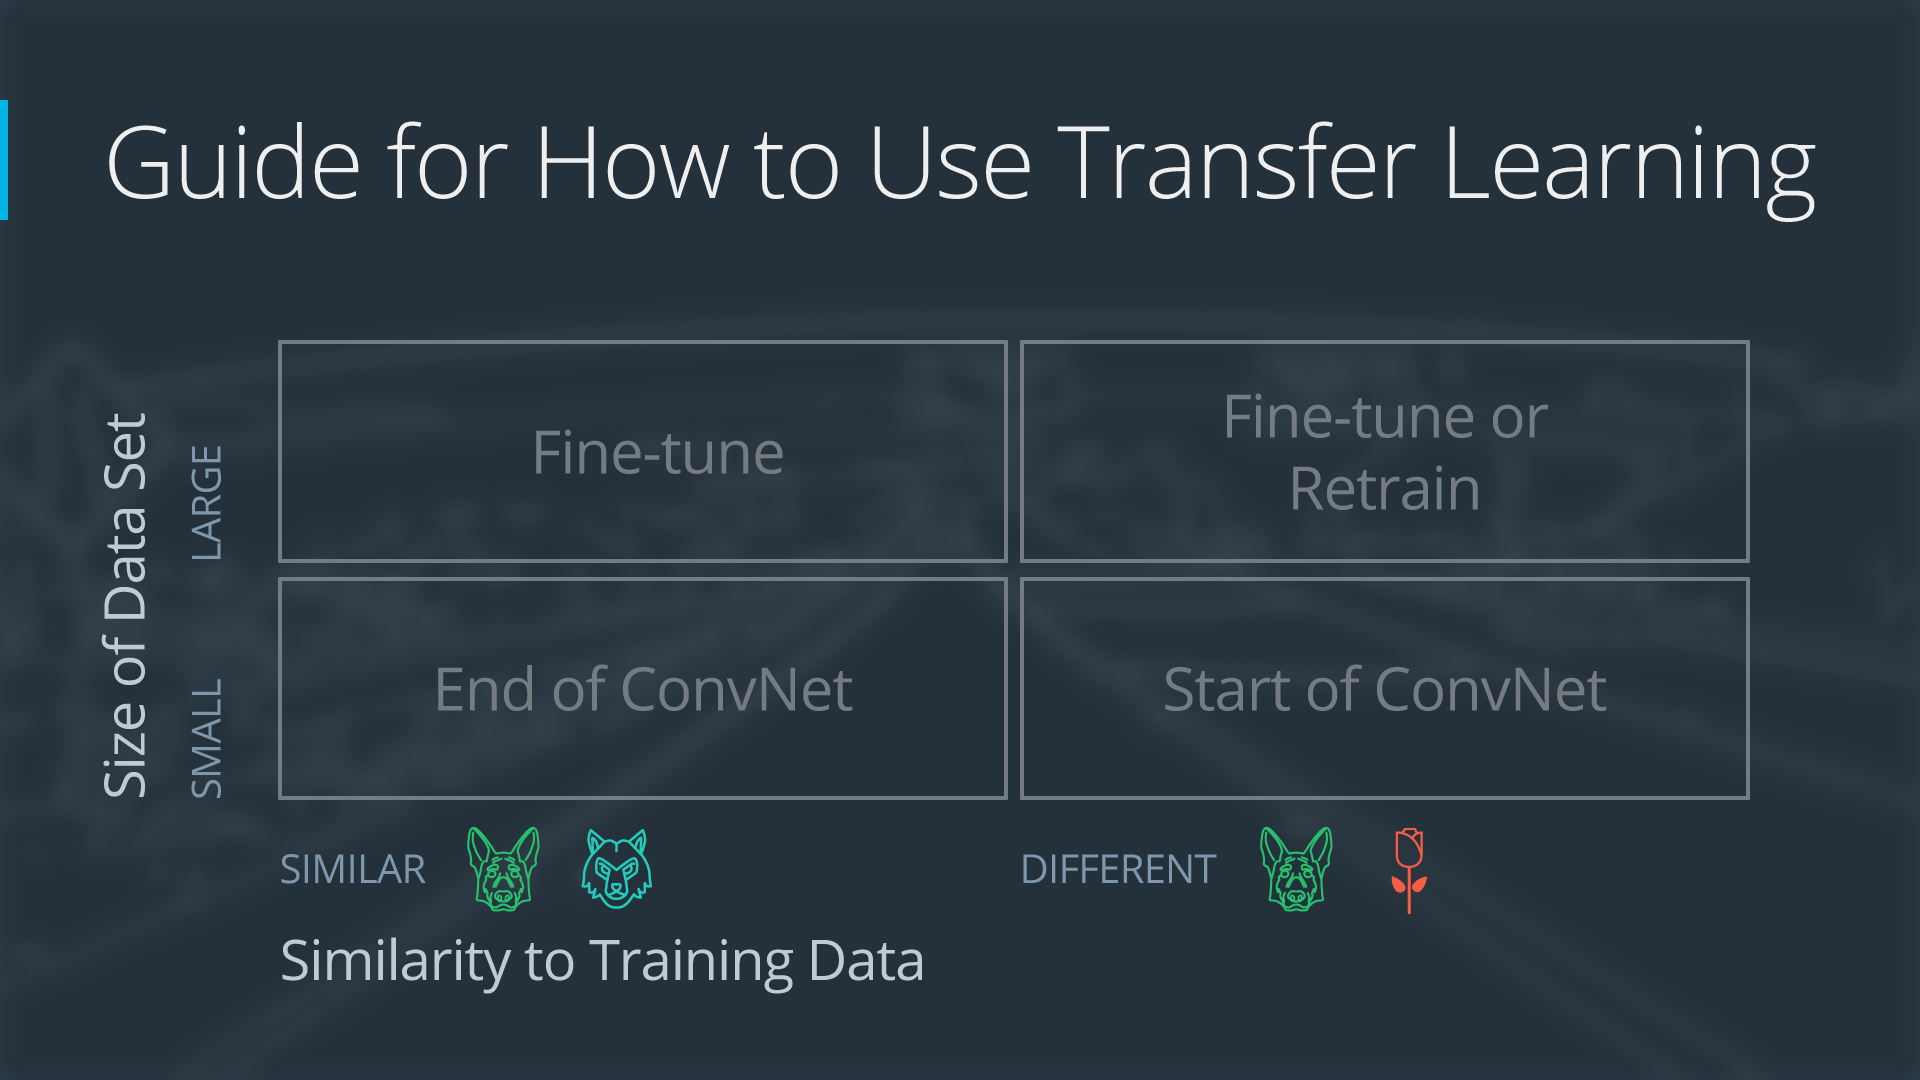 Four Use Cases of Transfer Learning